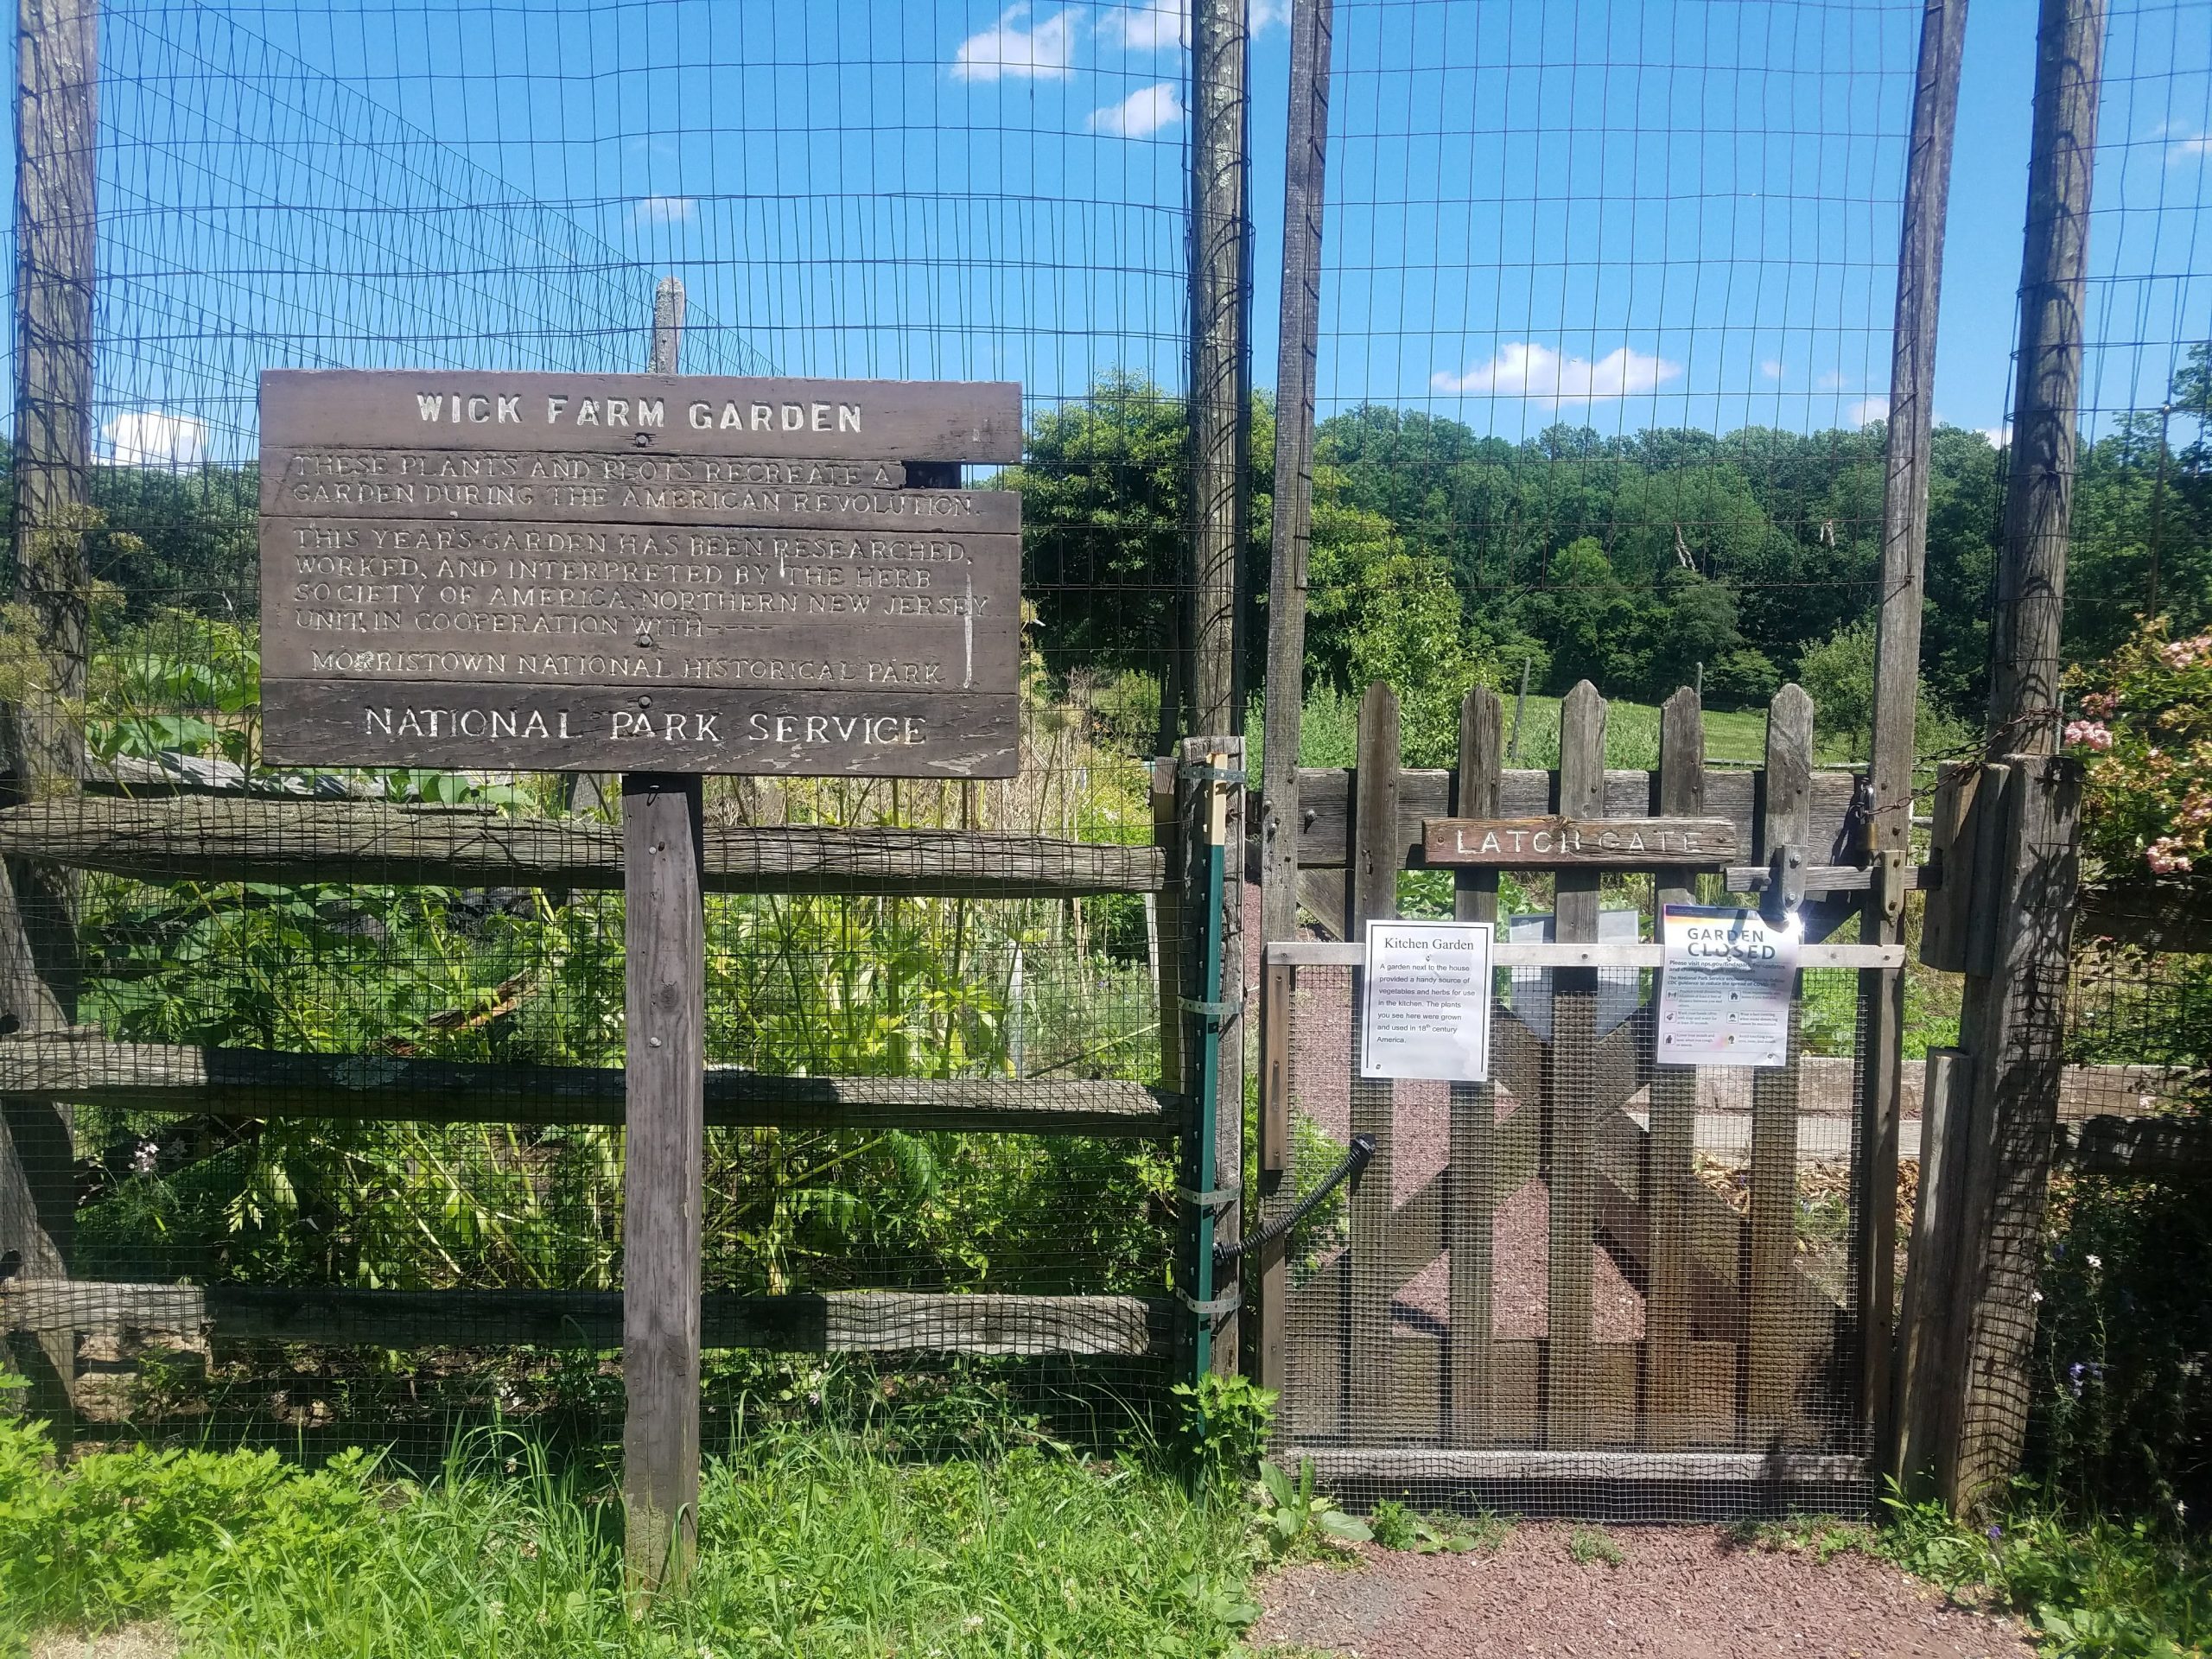 A sign and gate labeled "Wick Farm Garden" in Jockey Hollow Park